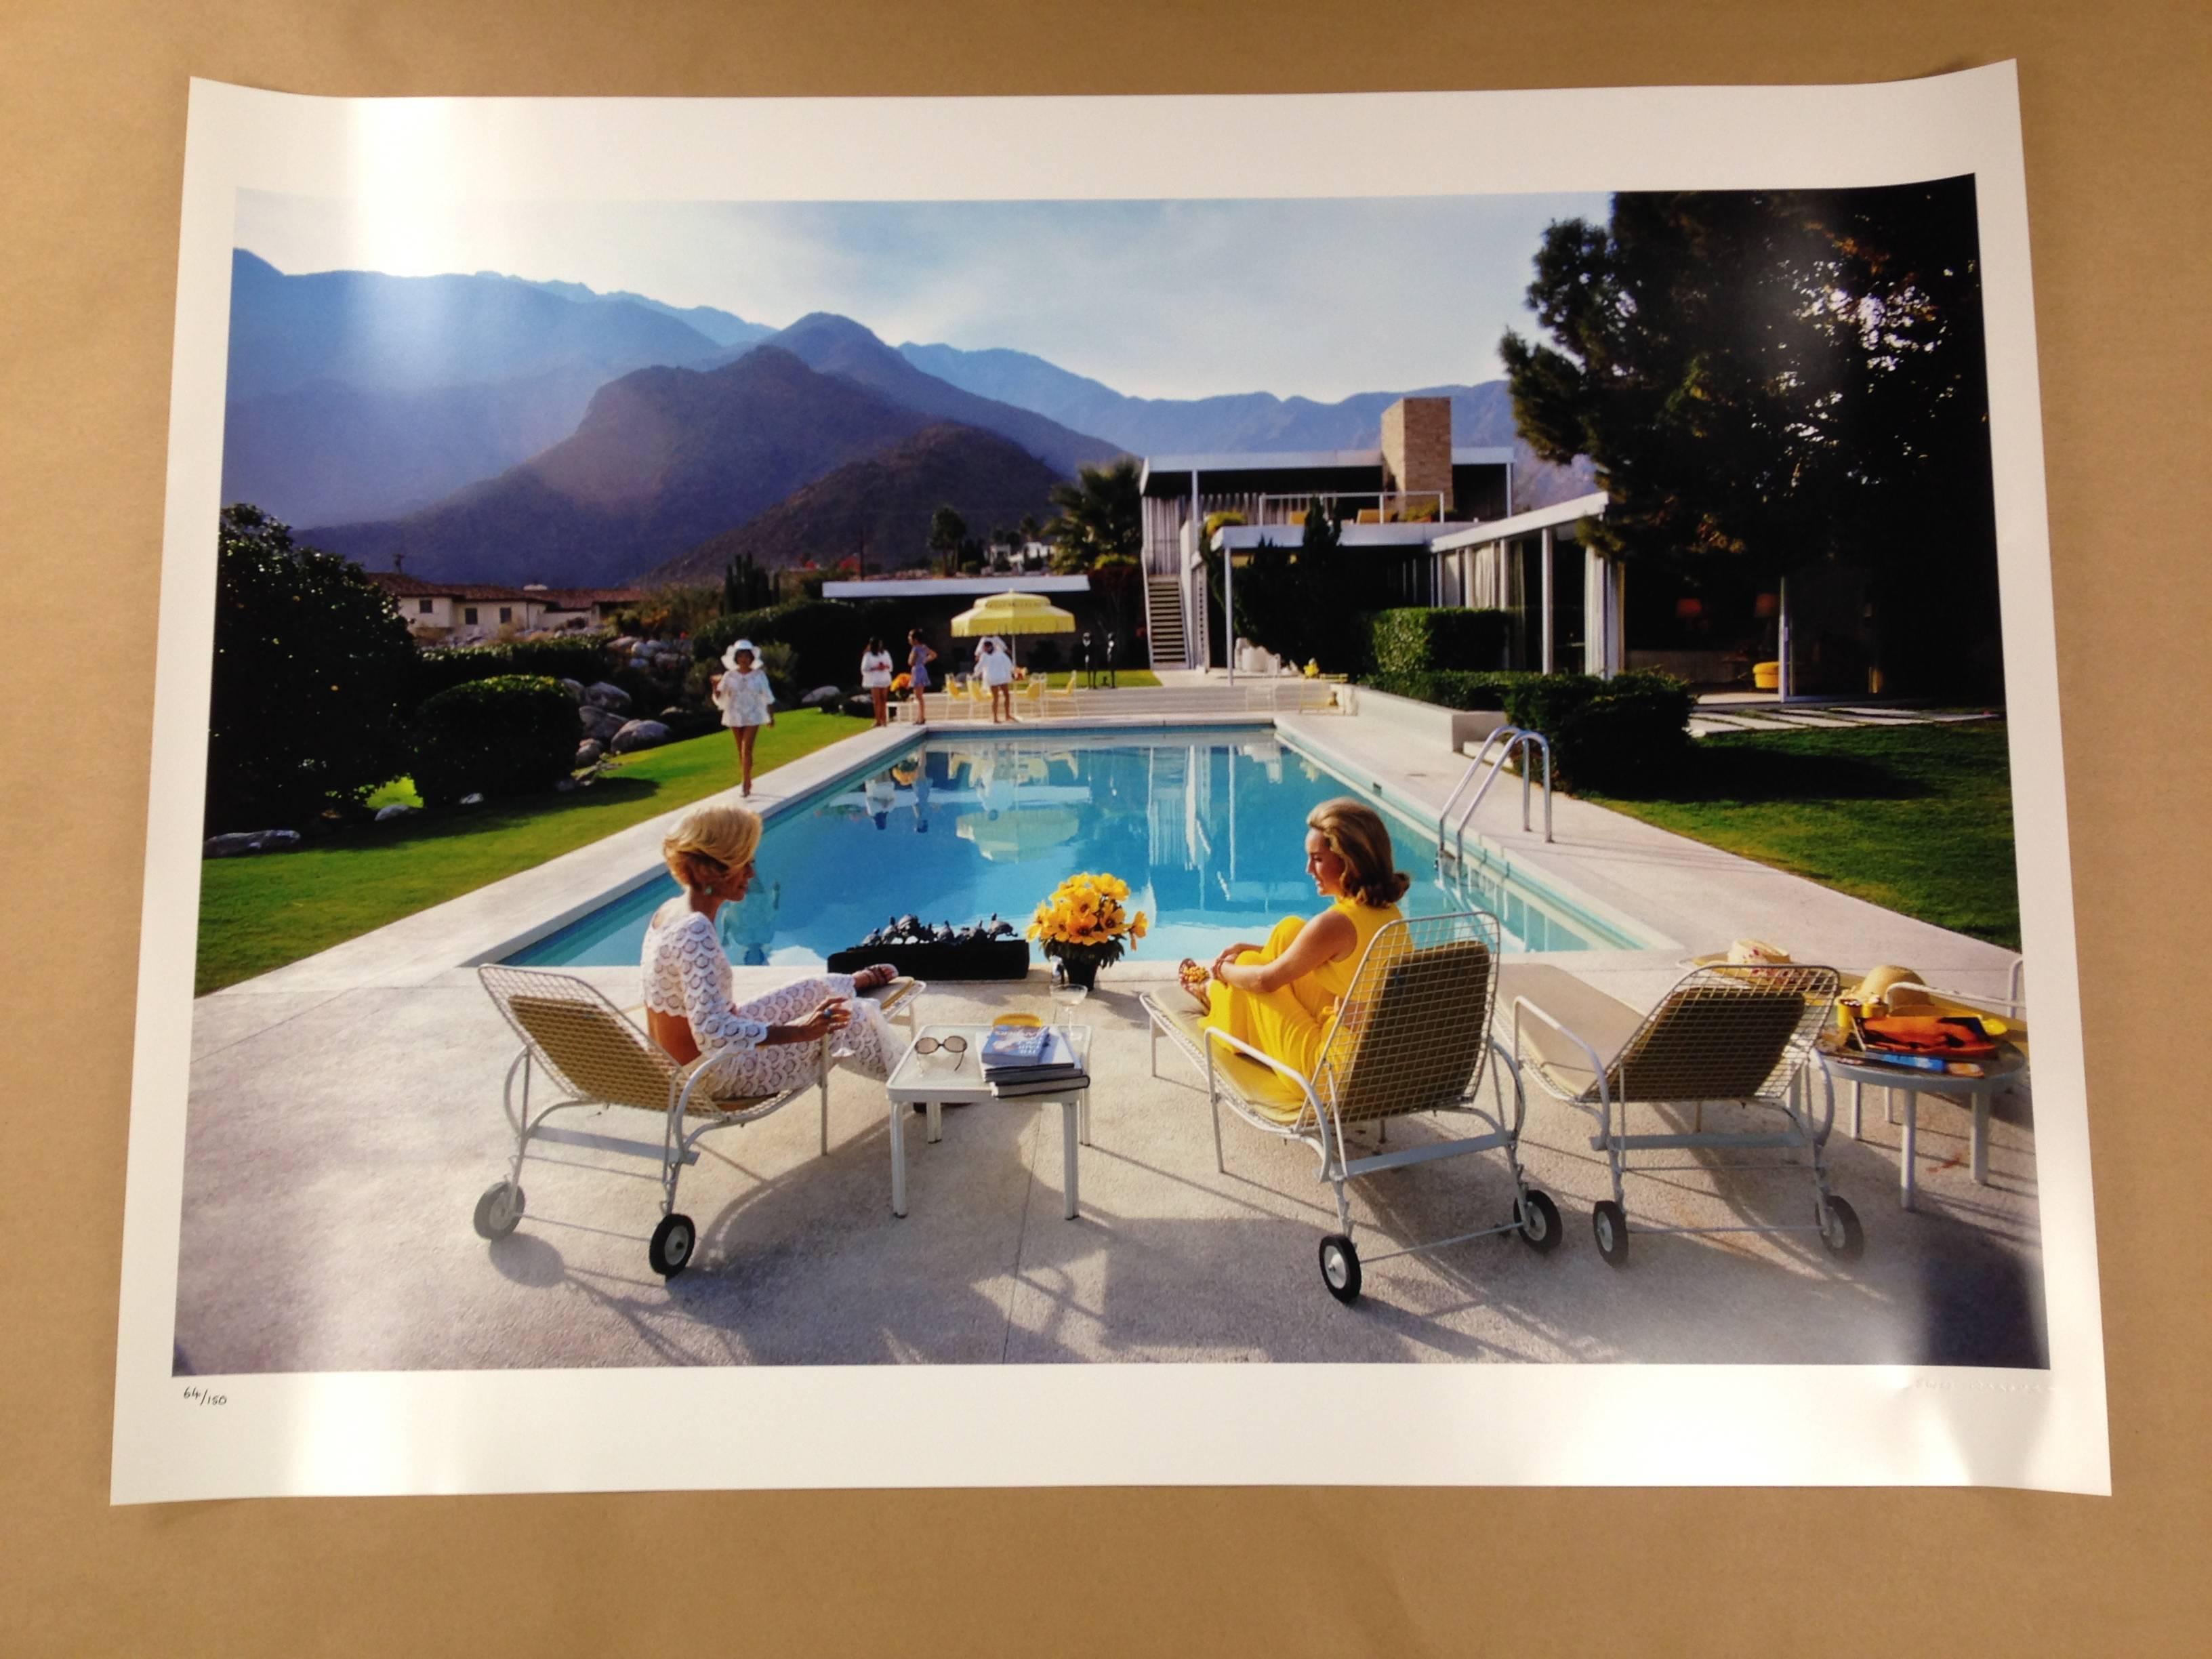 Finding a Spot (Limited Edition Estate Stamped) - Realist Photograph by Slim Aarons